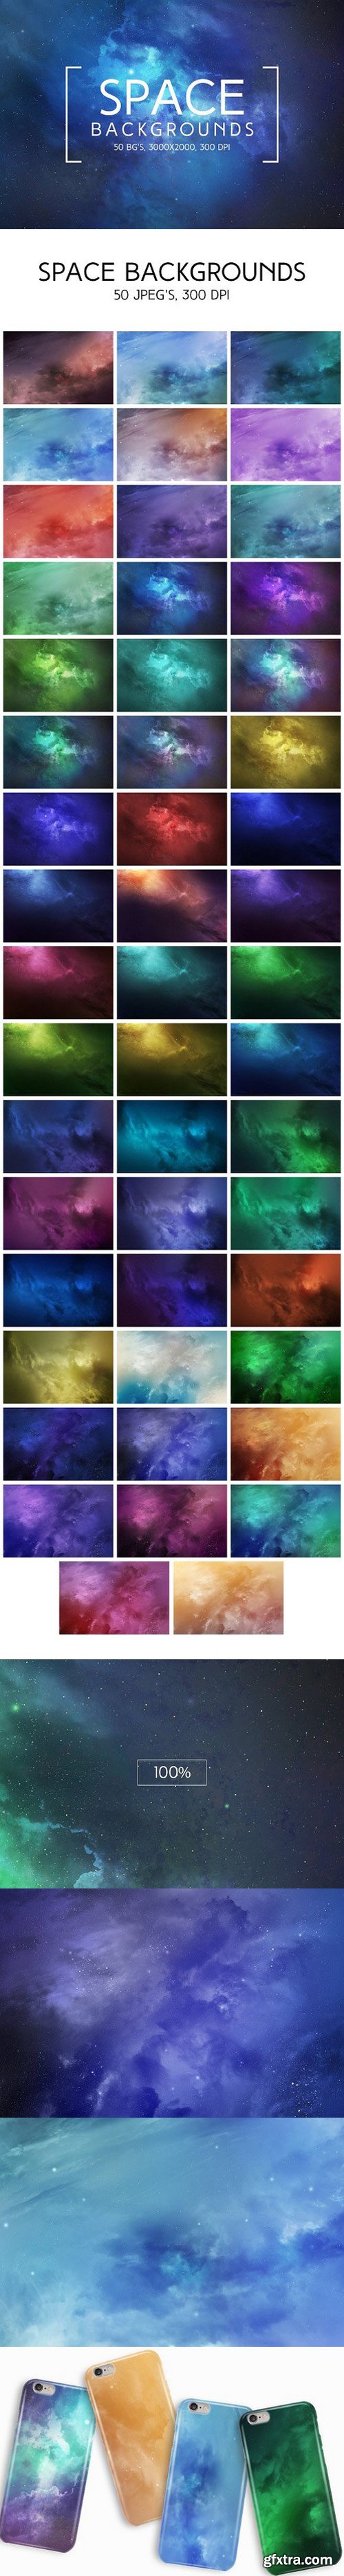 50 Space Backgrounds 1151907